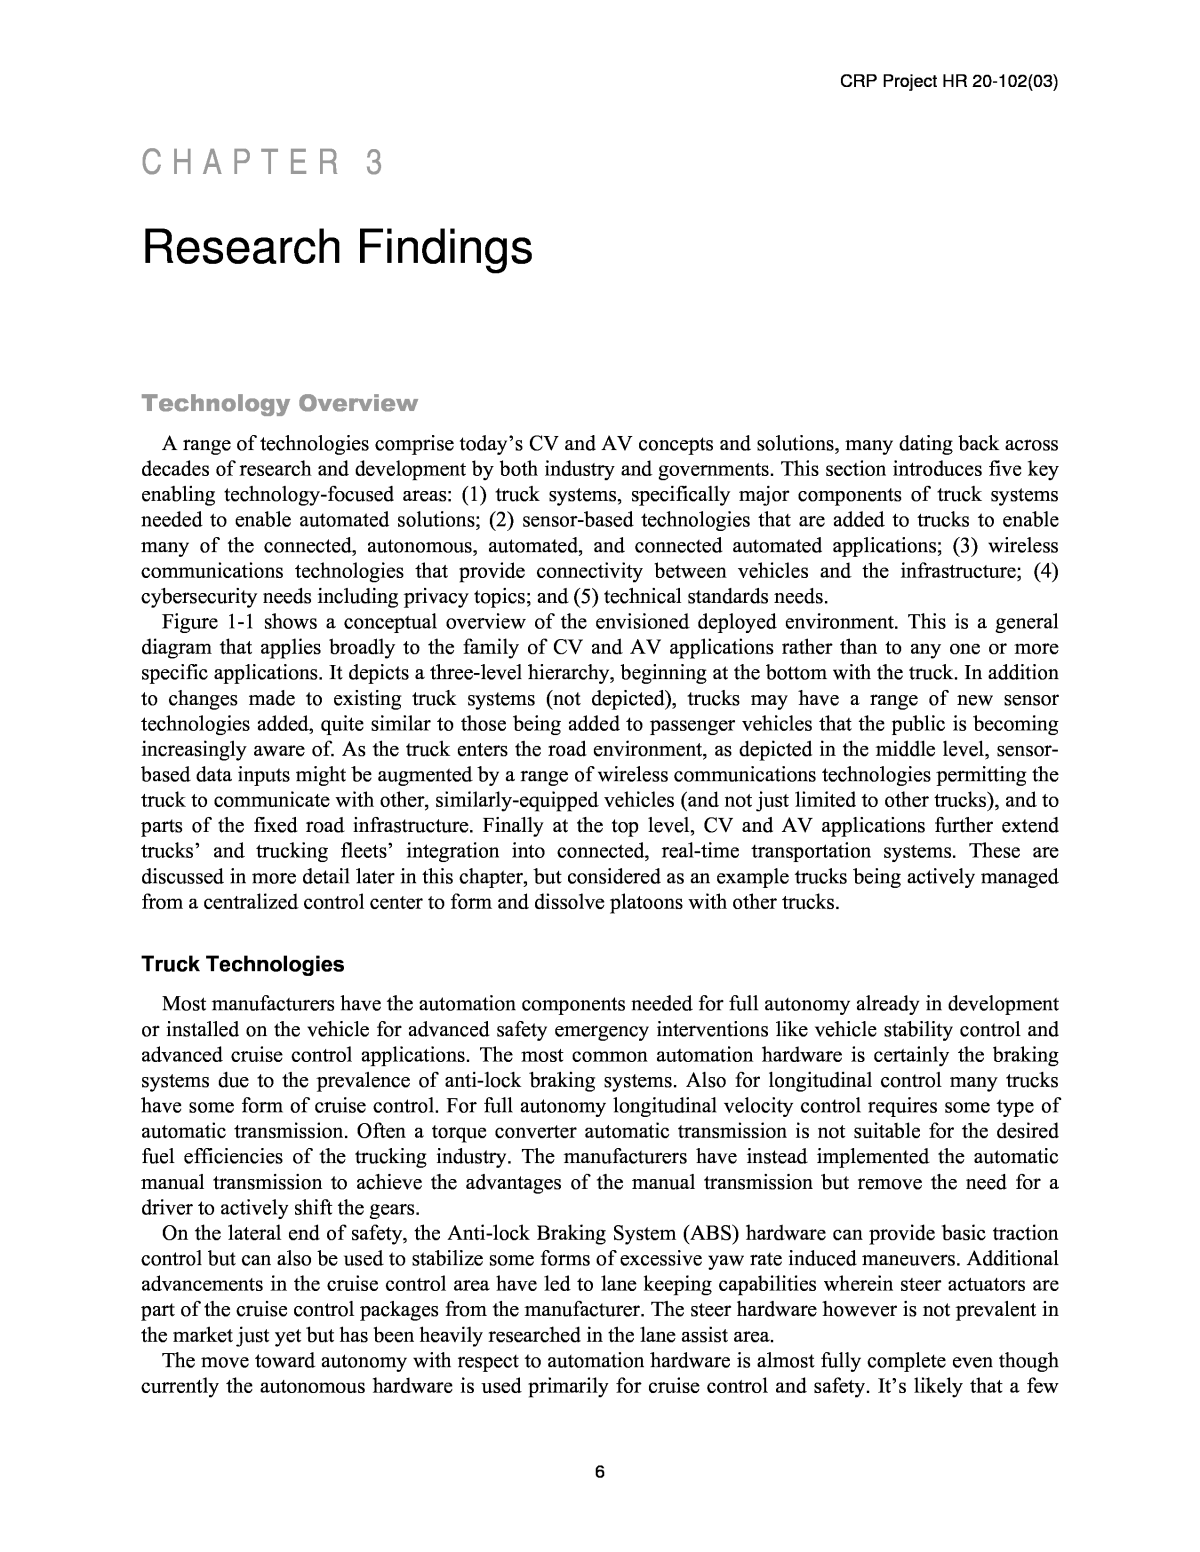 What is research findings?